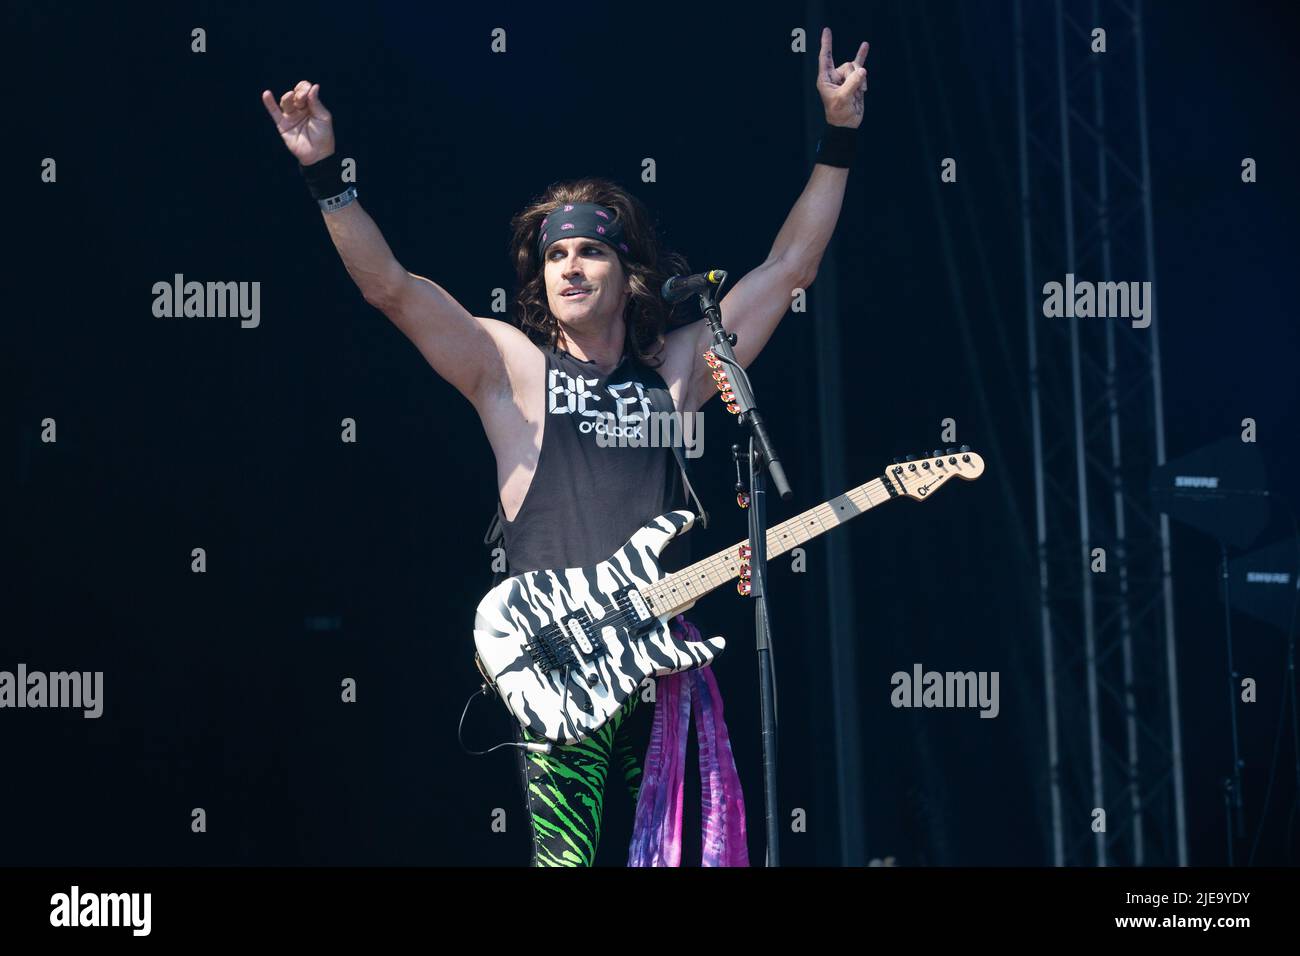 Oslo, Norway. 24th, June 2022. The American glam metal band Steel Panther performs a live concert during the Norwegian music festival Tons of Rock 2022 in Oslo. Here guitarist Satchel is seen live on stage. (Photo credit: Gonzales Photo - Per-Otto Oppi). Stock Photo